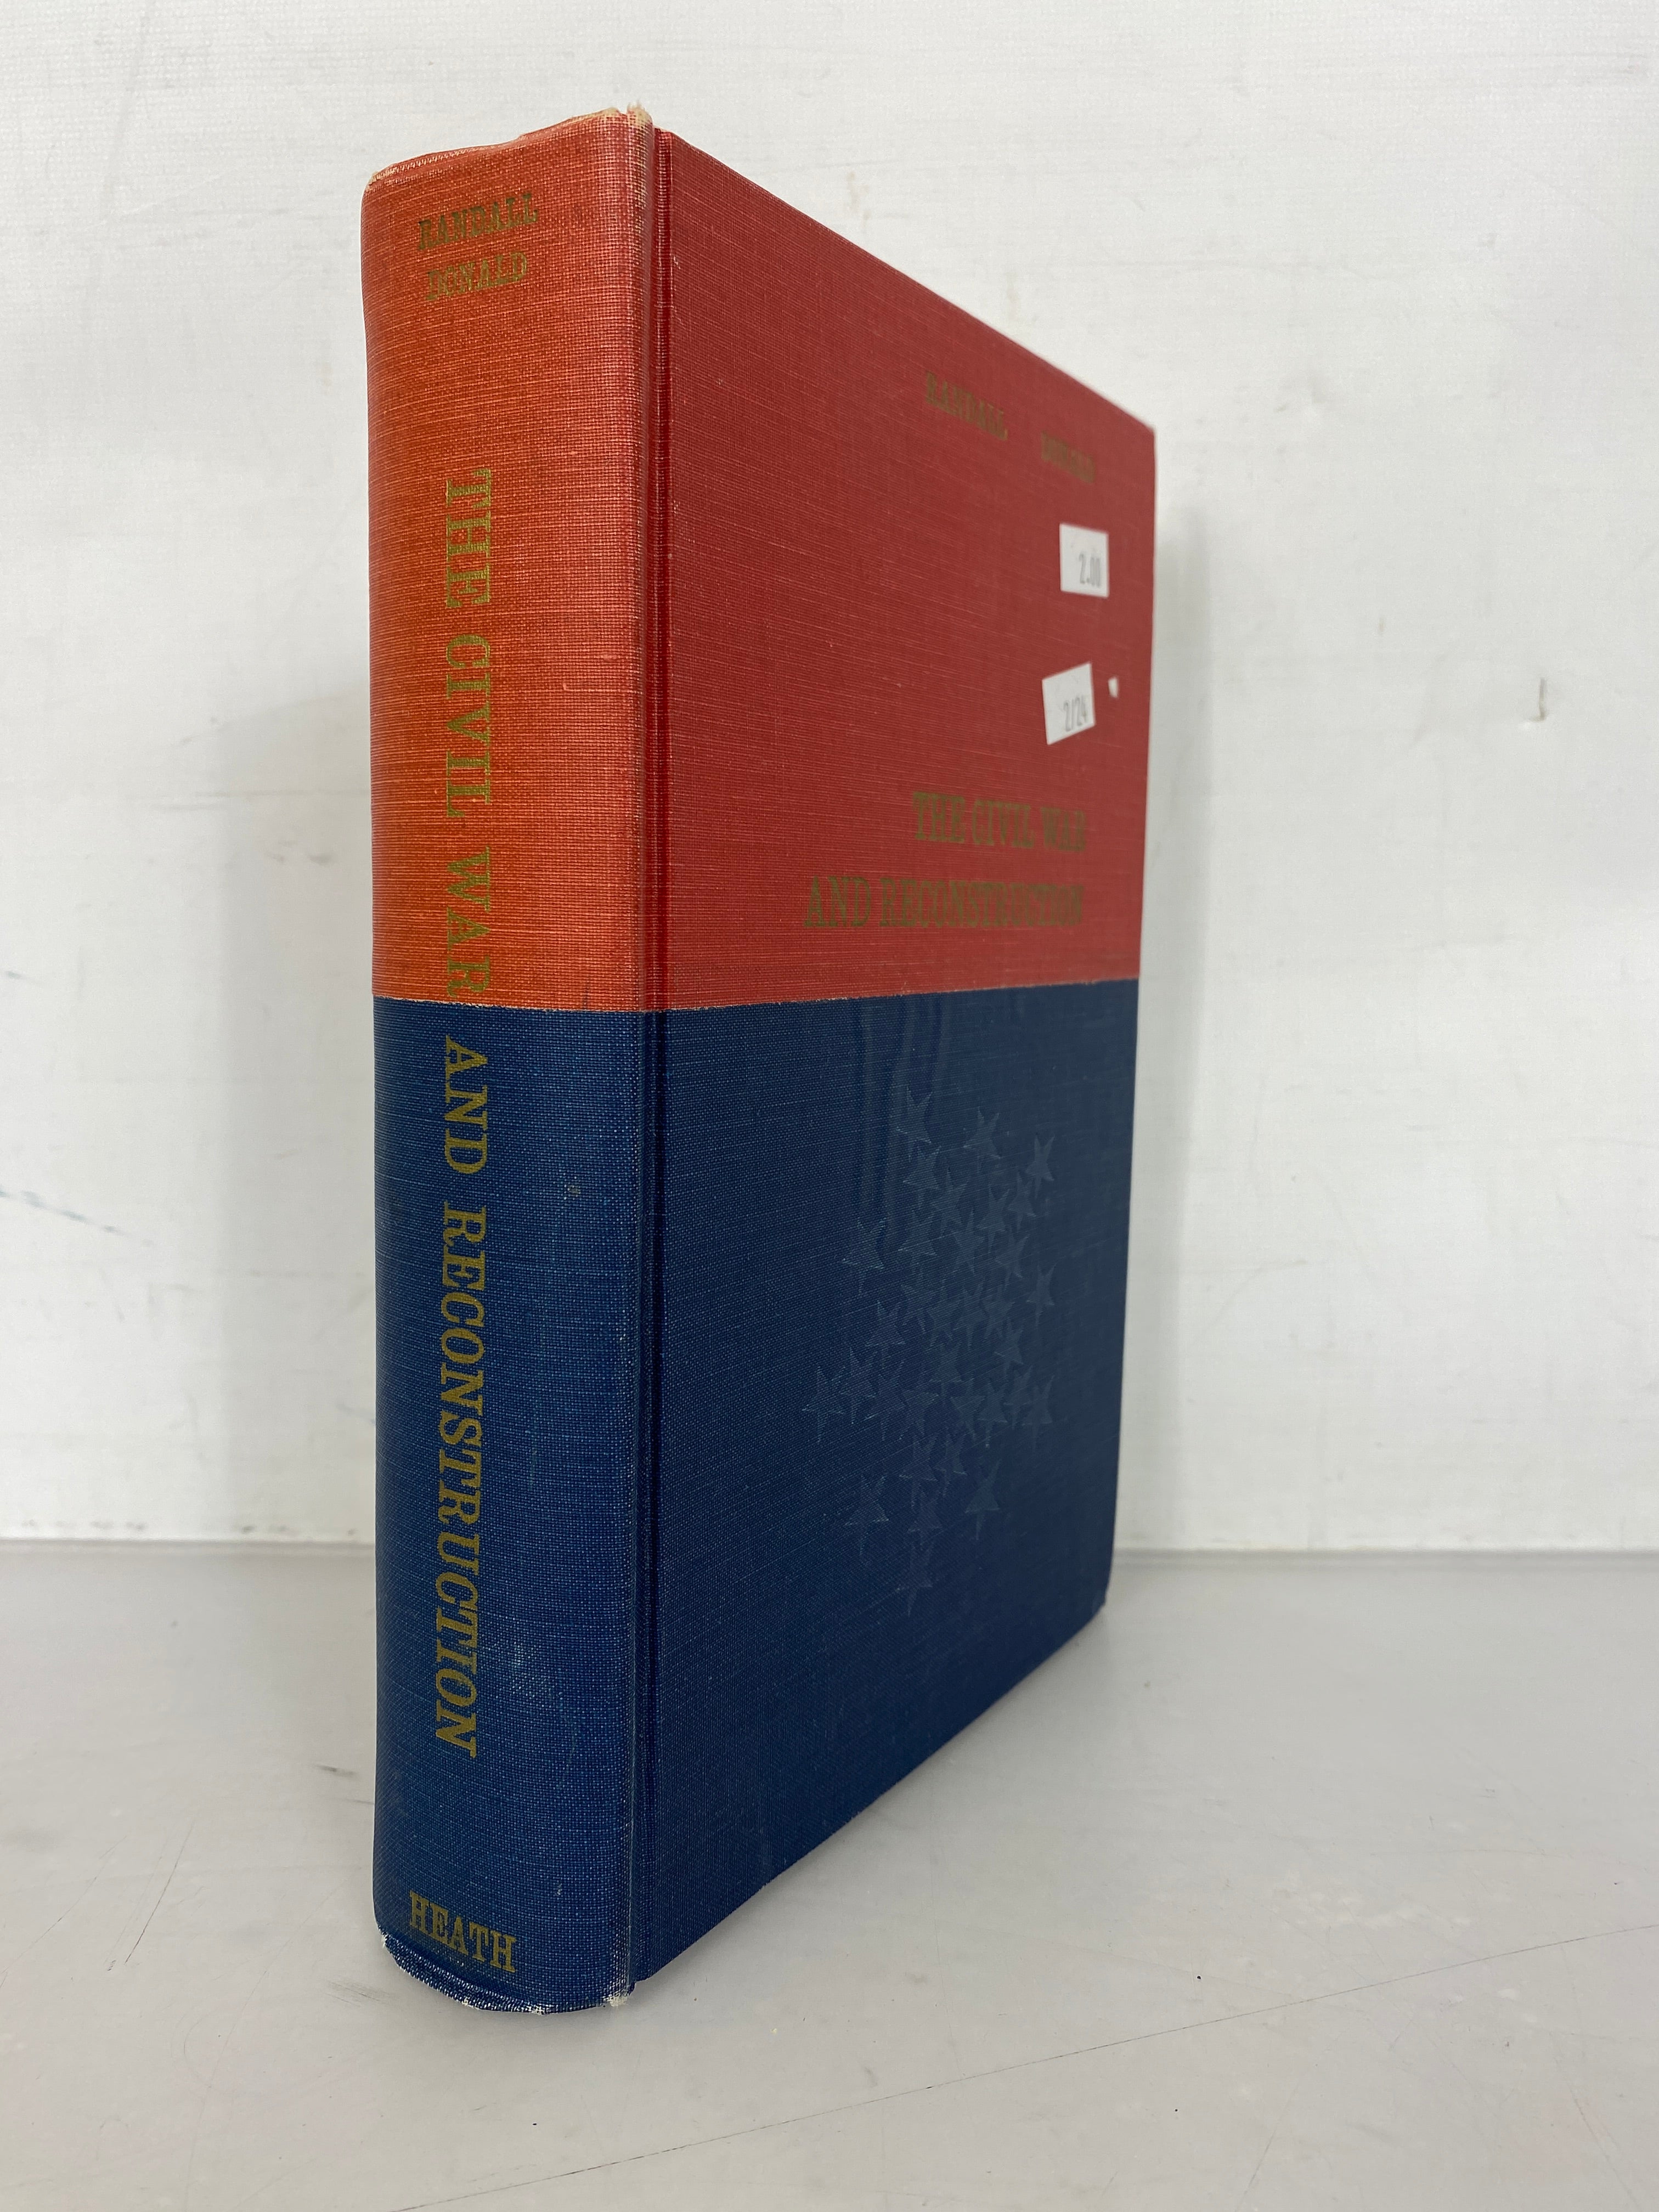 Vintage The Civil War and Reconstruction by Randall and Donald 1969 Second Edition HC